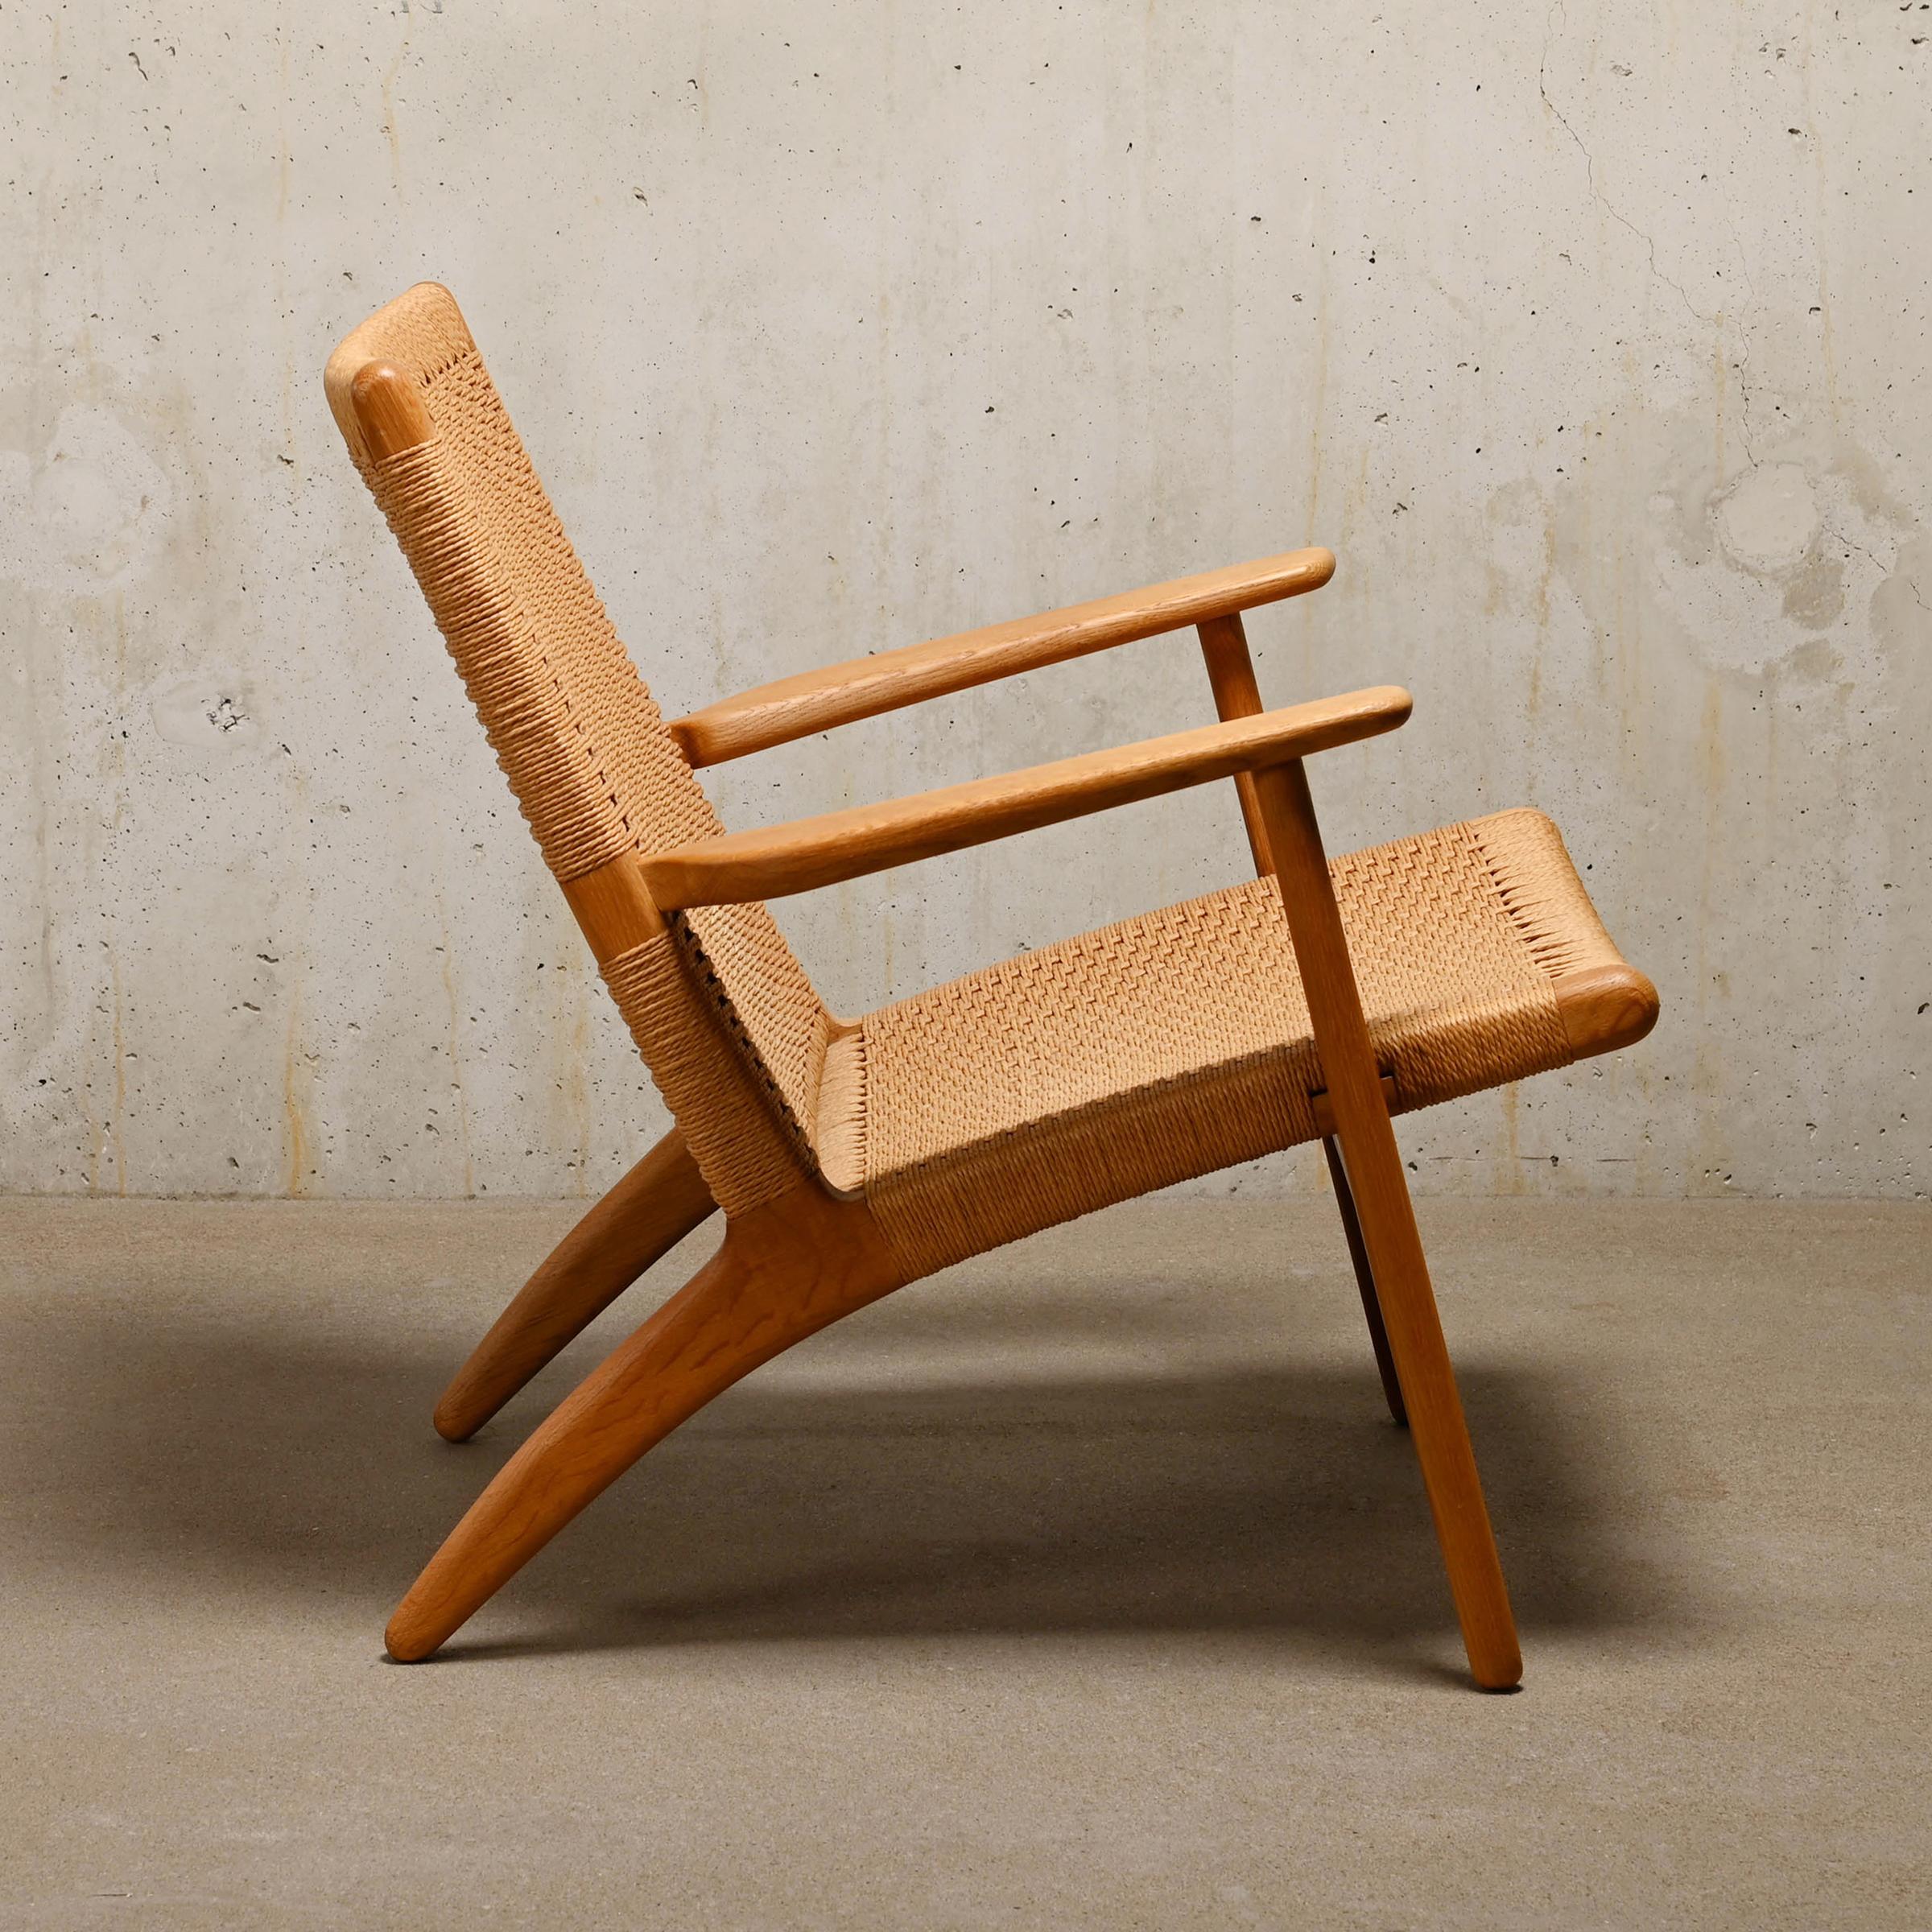 Papercord Hans J. Wegner CH25 Lounge Chair in oak and paper-cord for Carl Hansen & Son